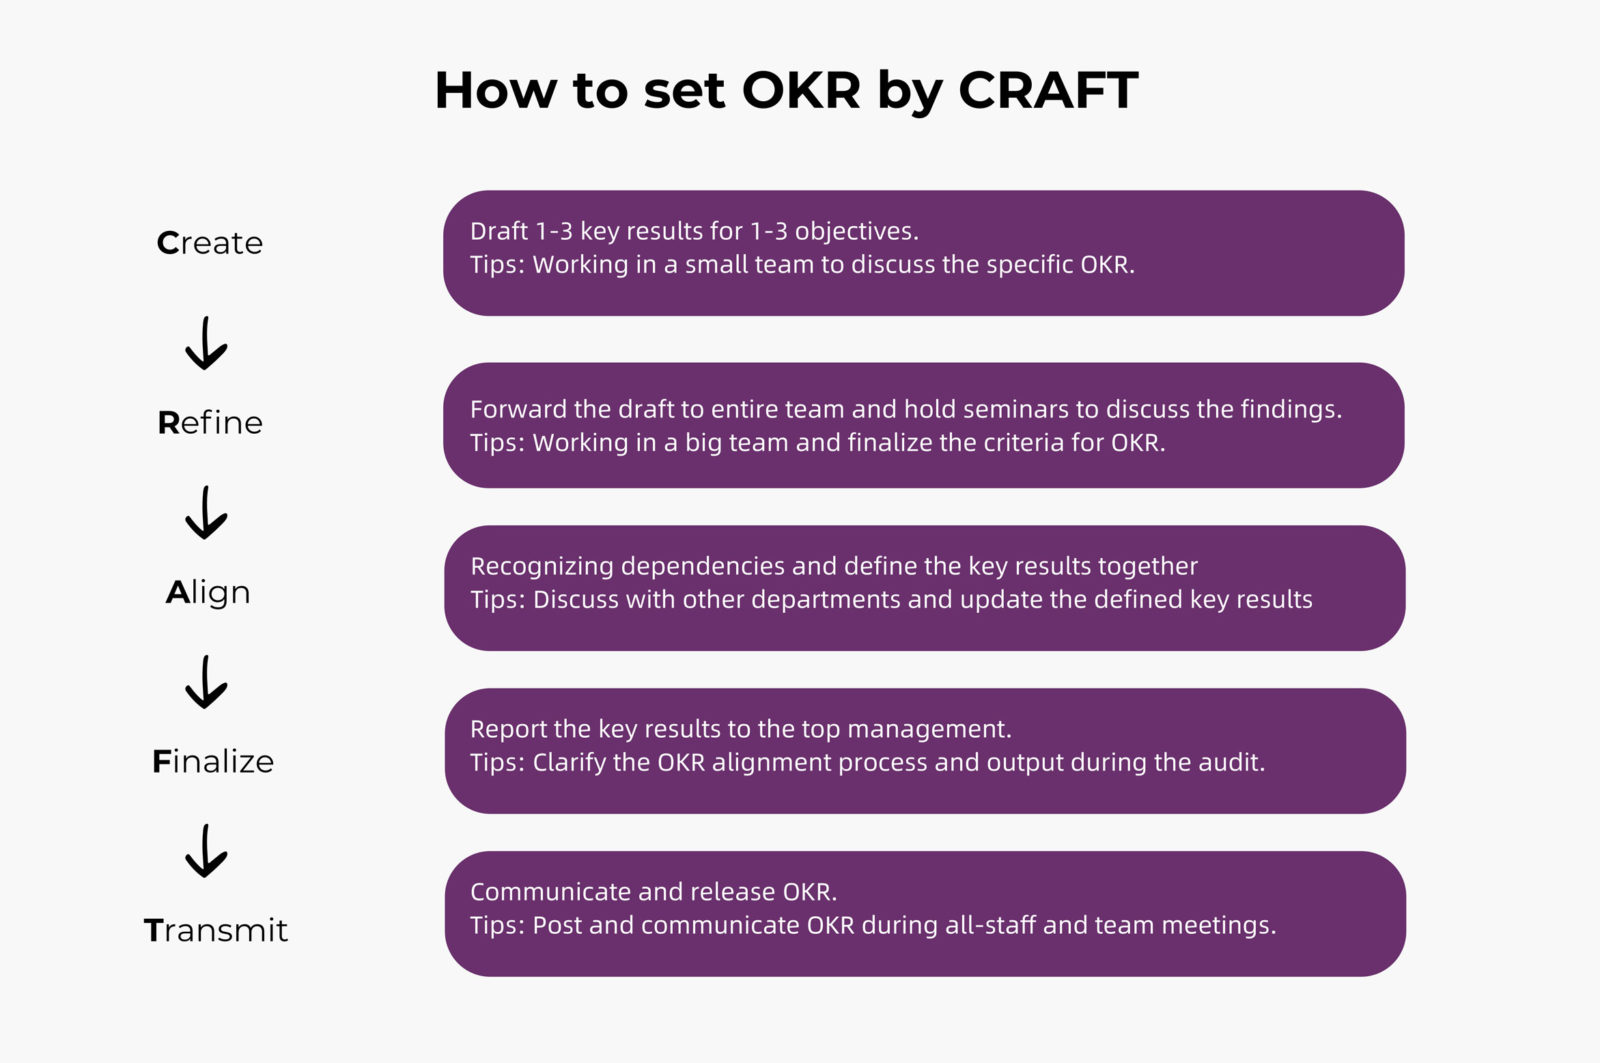 How to use OKR to achieve efficient performance management? 3